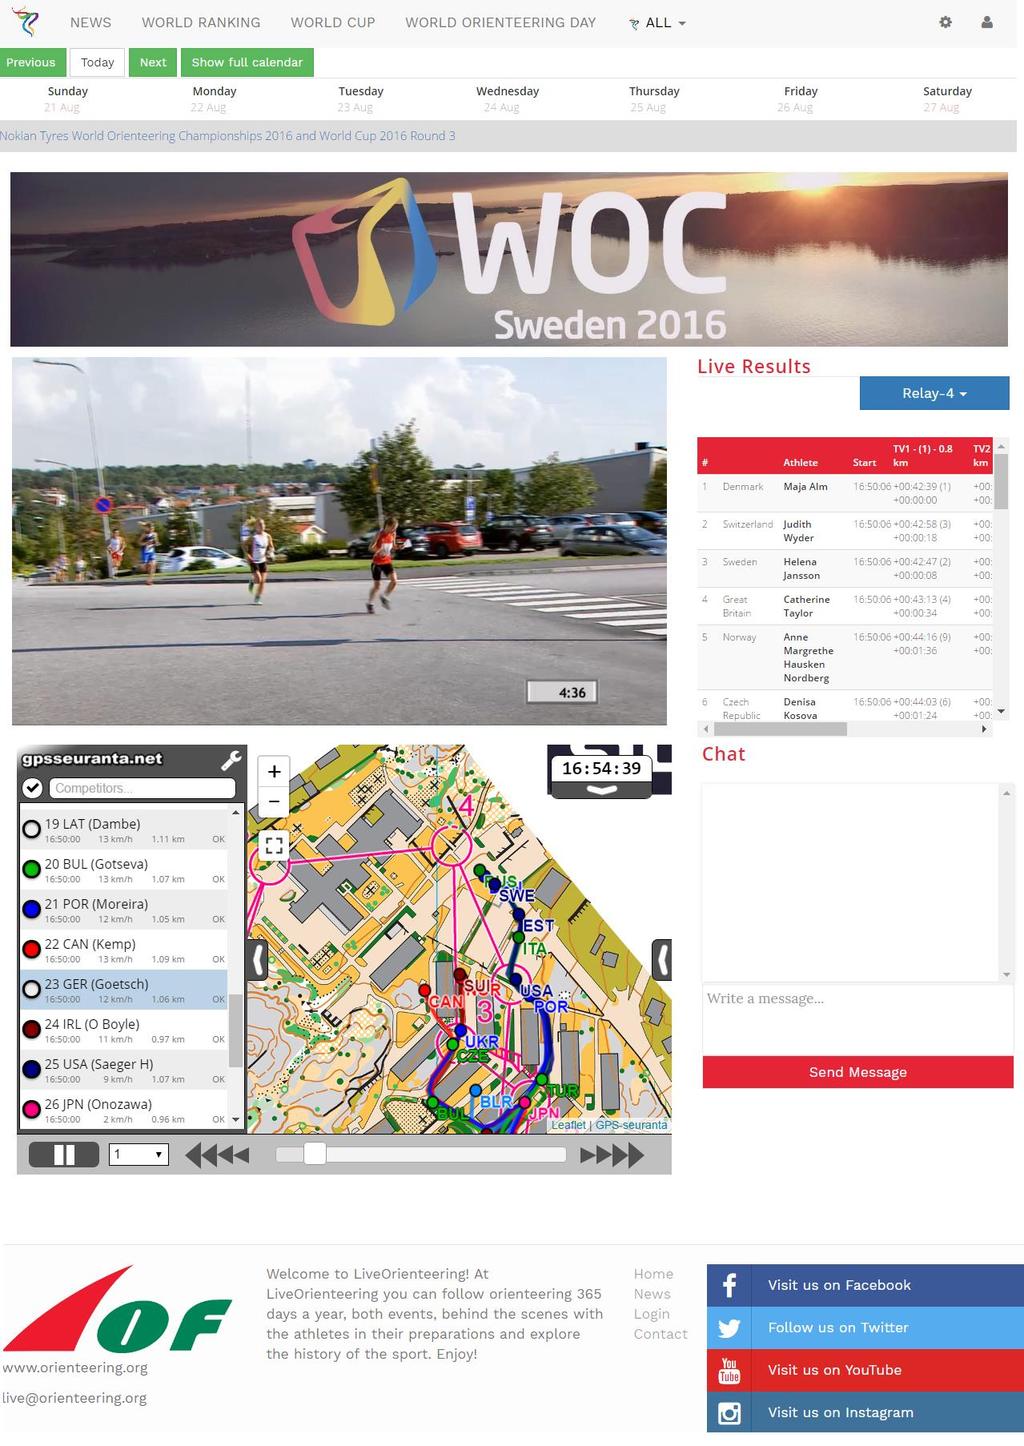 Event presentation LIVE Orienteering event Event in the LIVE Orienteering Calendar Alert banner in LIVE Orienteering Event page: Programme, Trailer, News, Event sponsors, Information about the